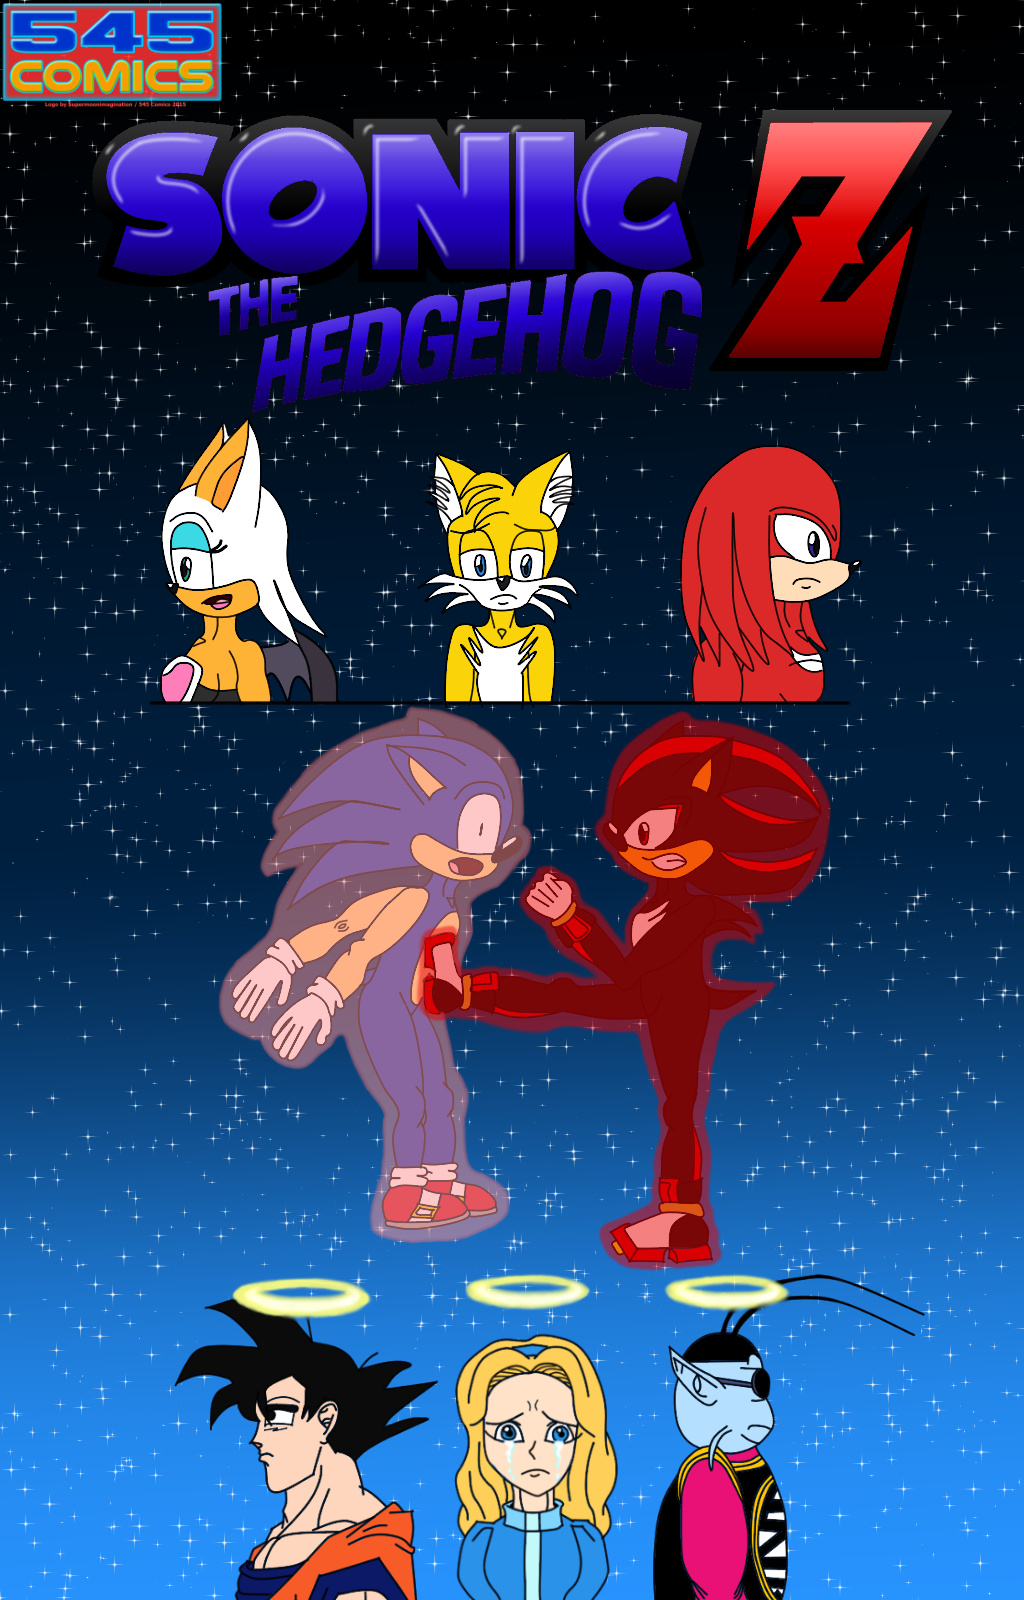 Sonic Cant Stand Dragonball Evolution by masedog78 on DeviantArt